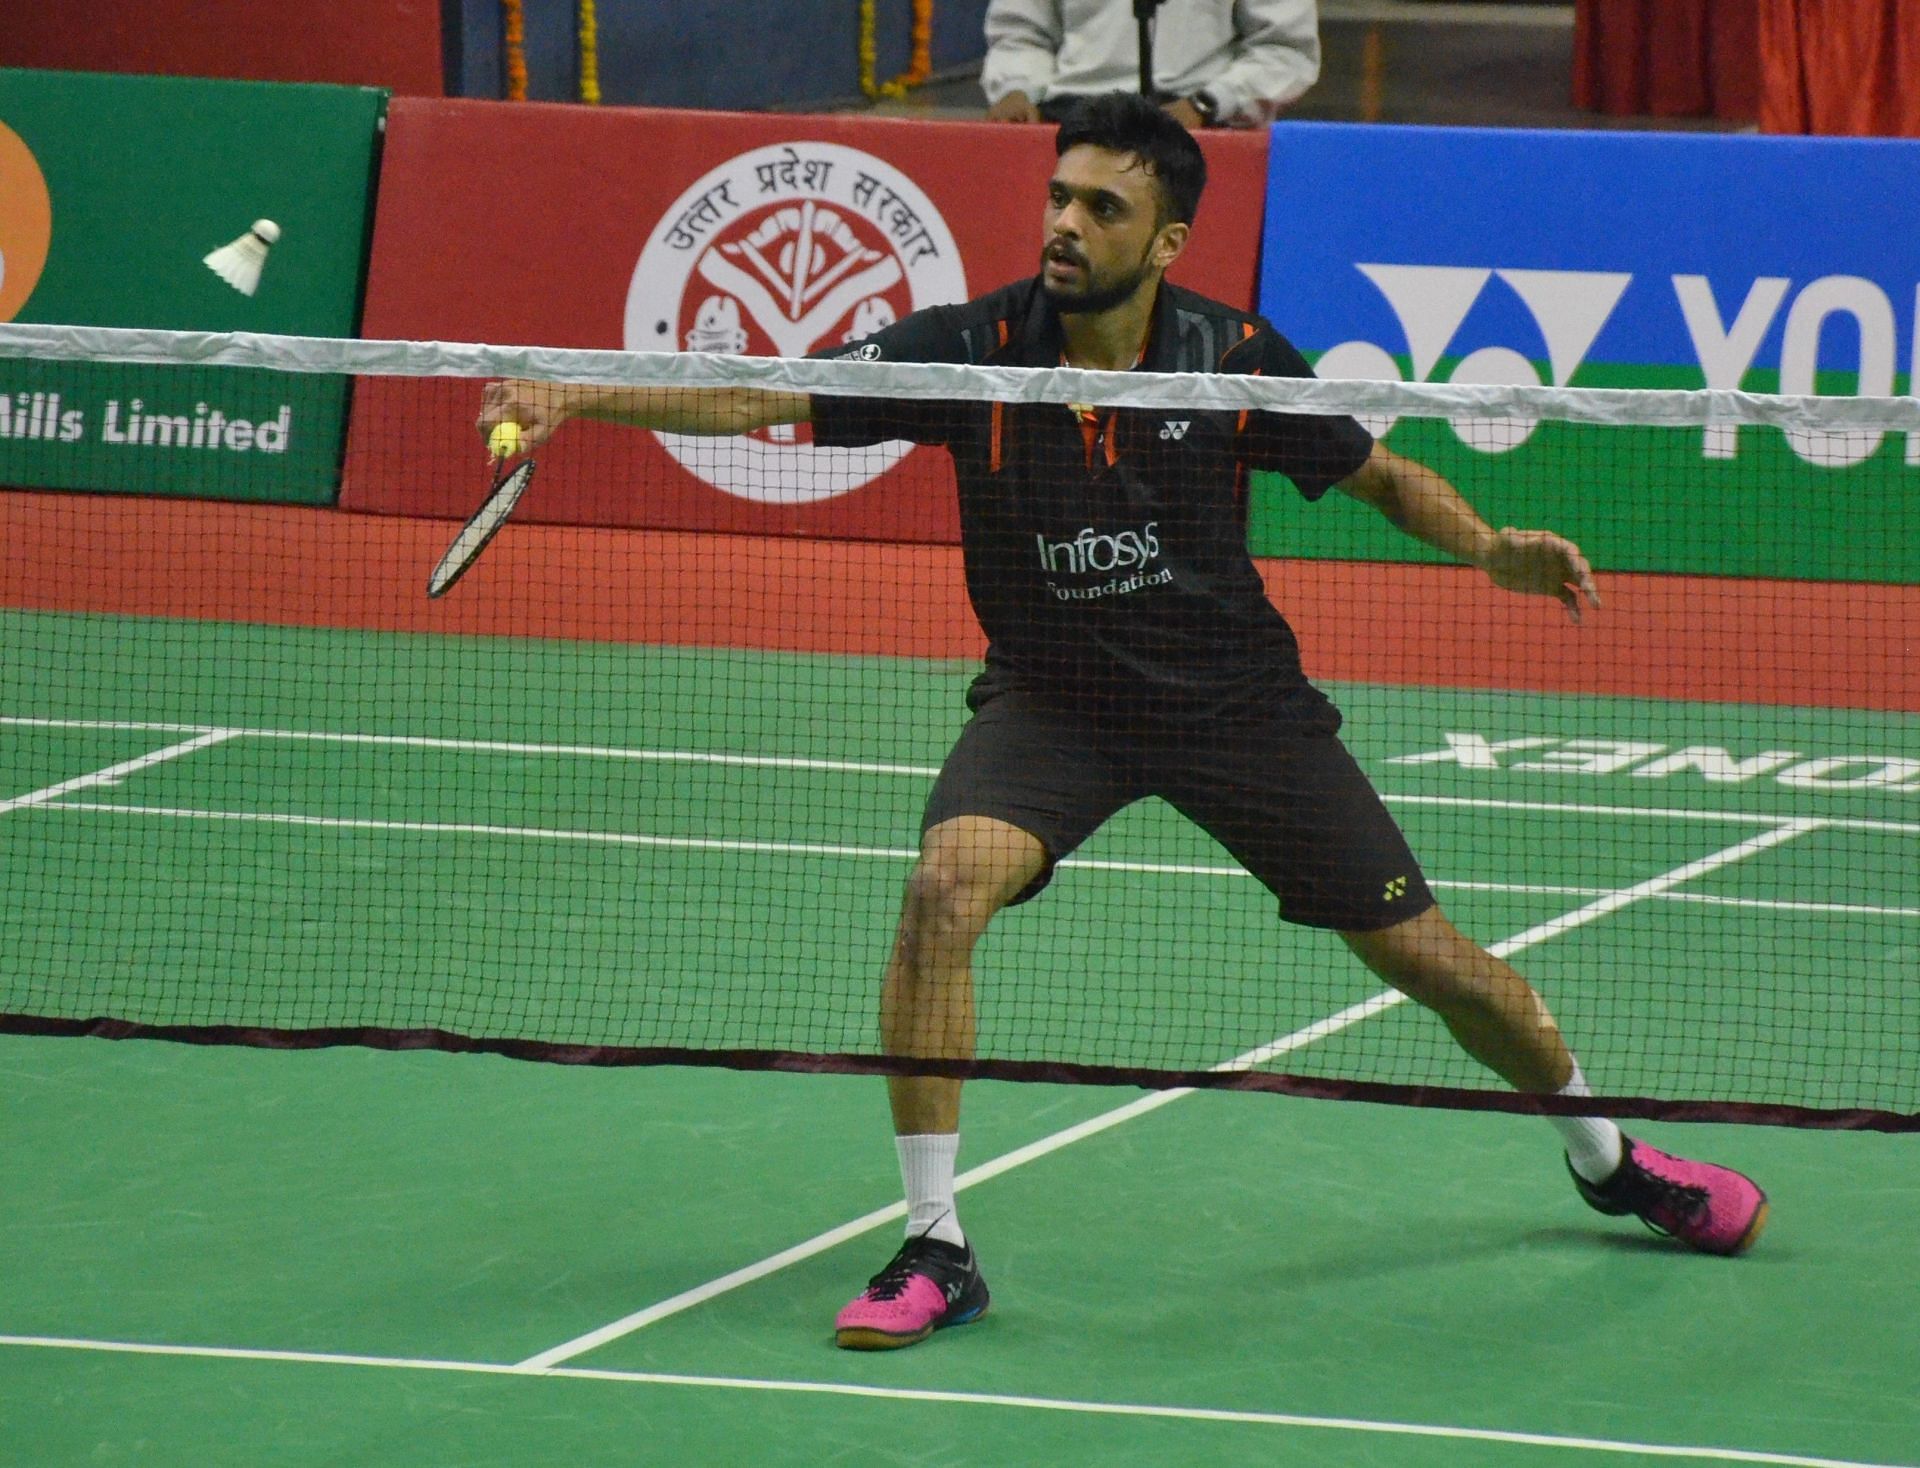 World No. 76 Mithun Manjunath will represent Malnad Falcons in the Grand Prix Badminton League slated to be held in Bengaluru from July 1 to 10. (Pic credit: BAI)